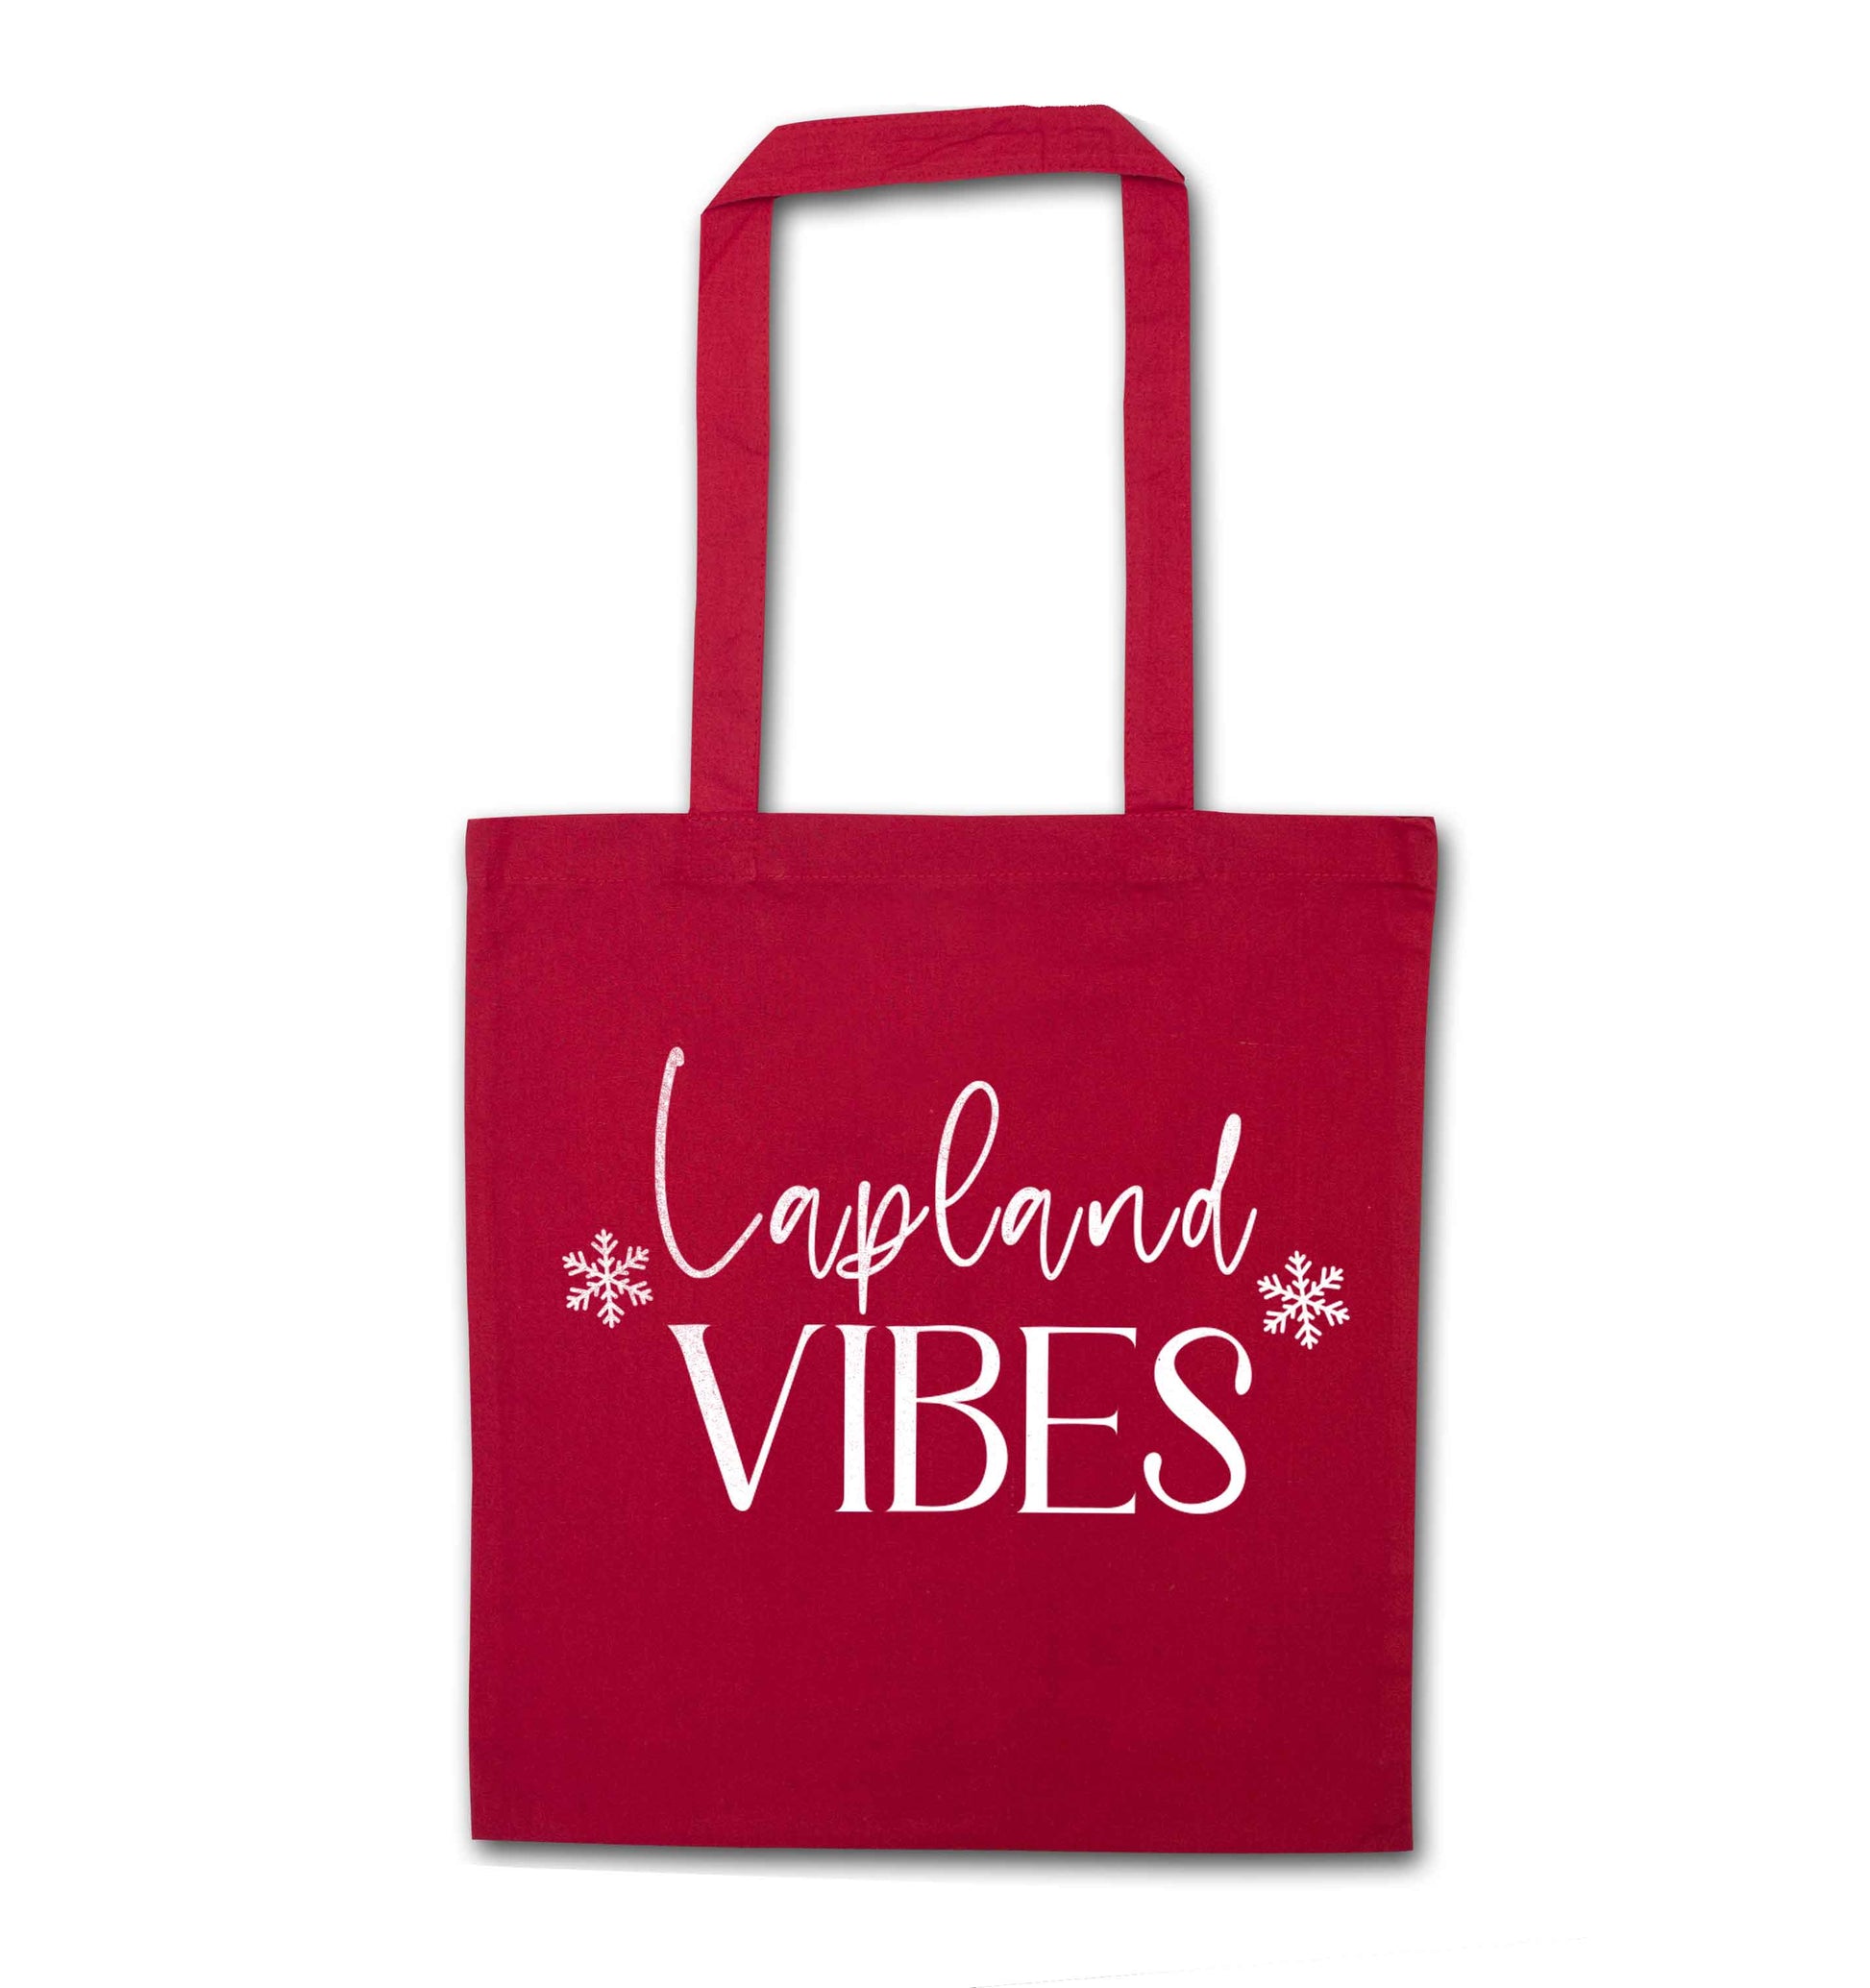 Lapland vibes red tote bag